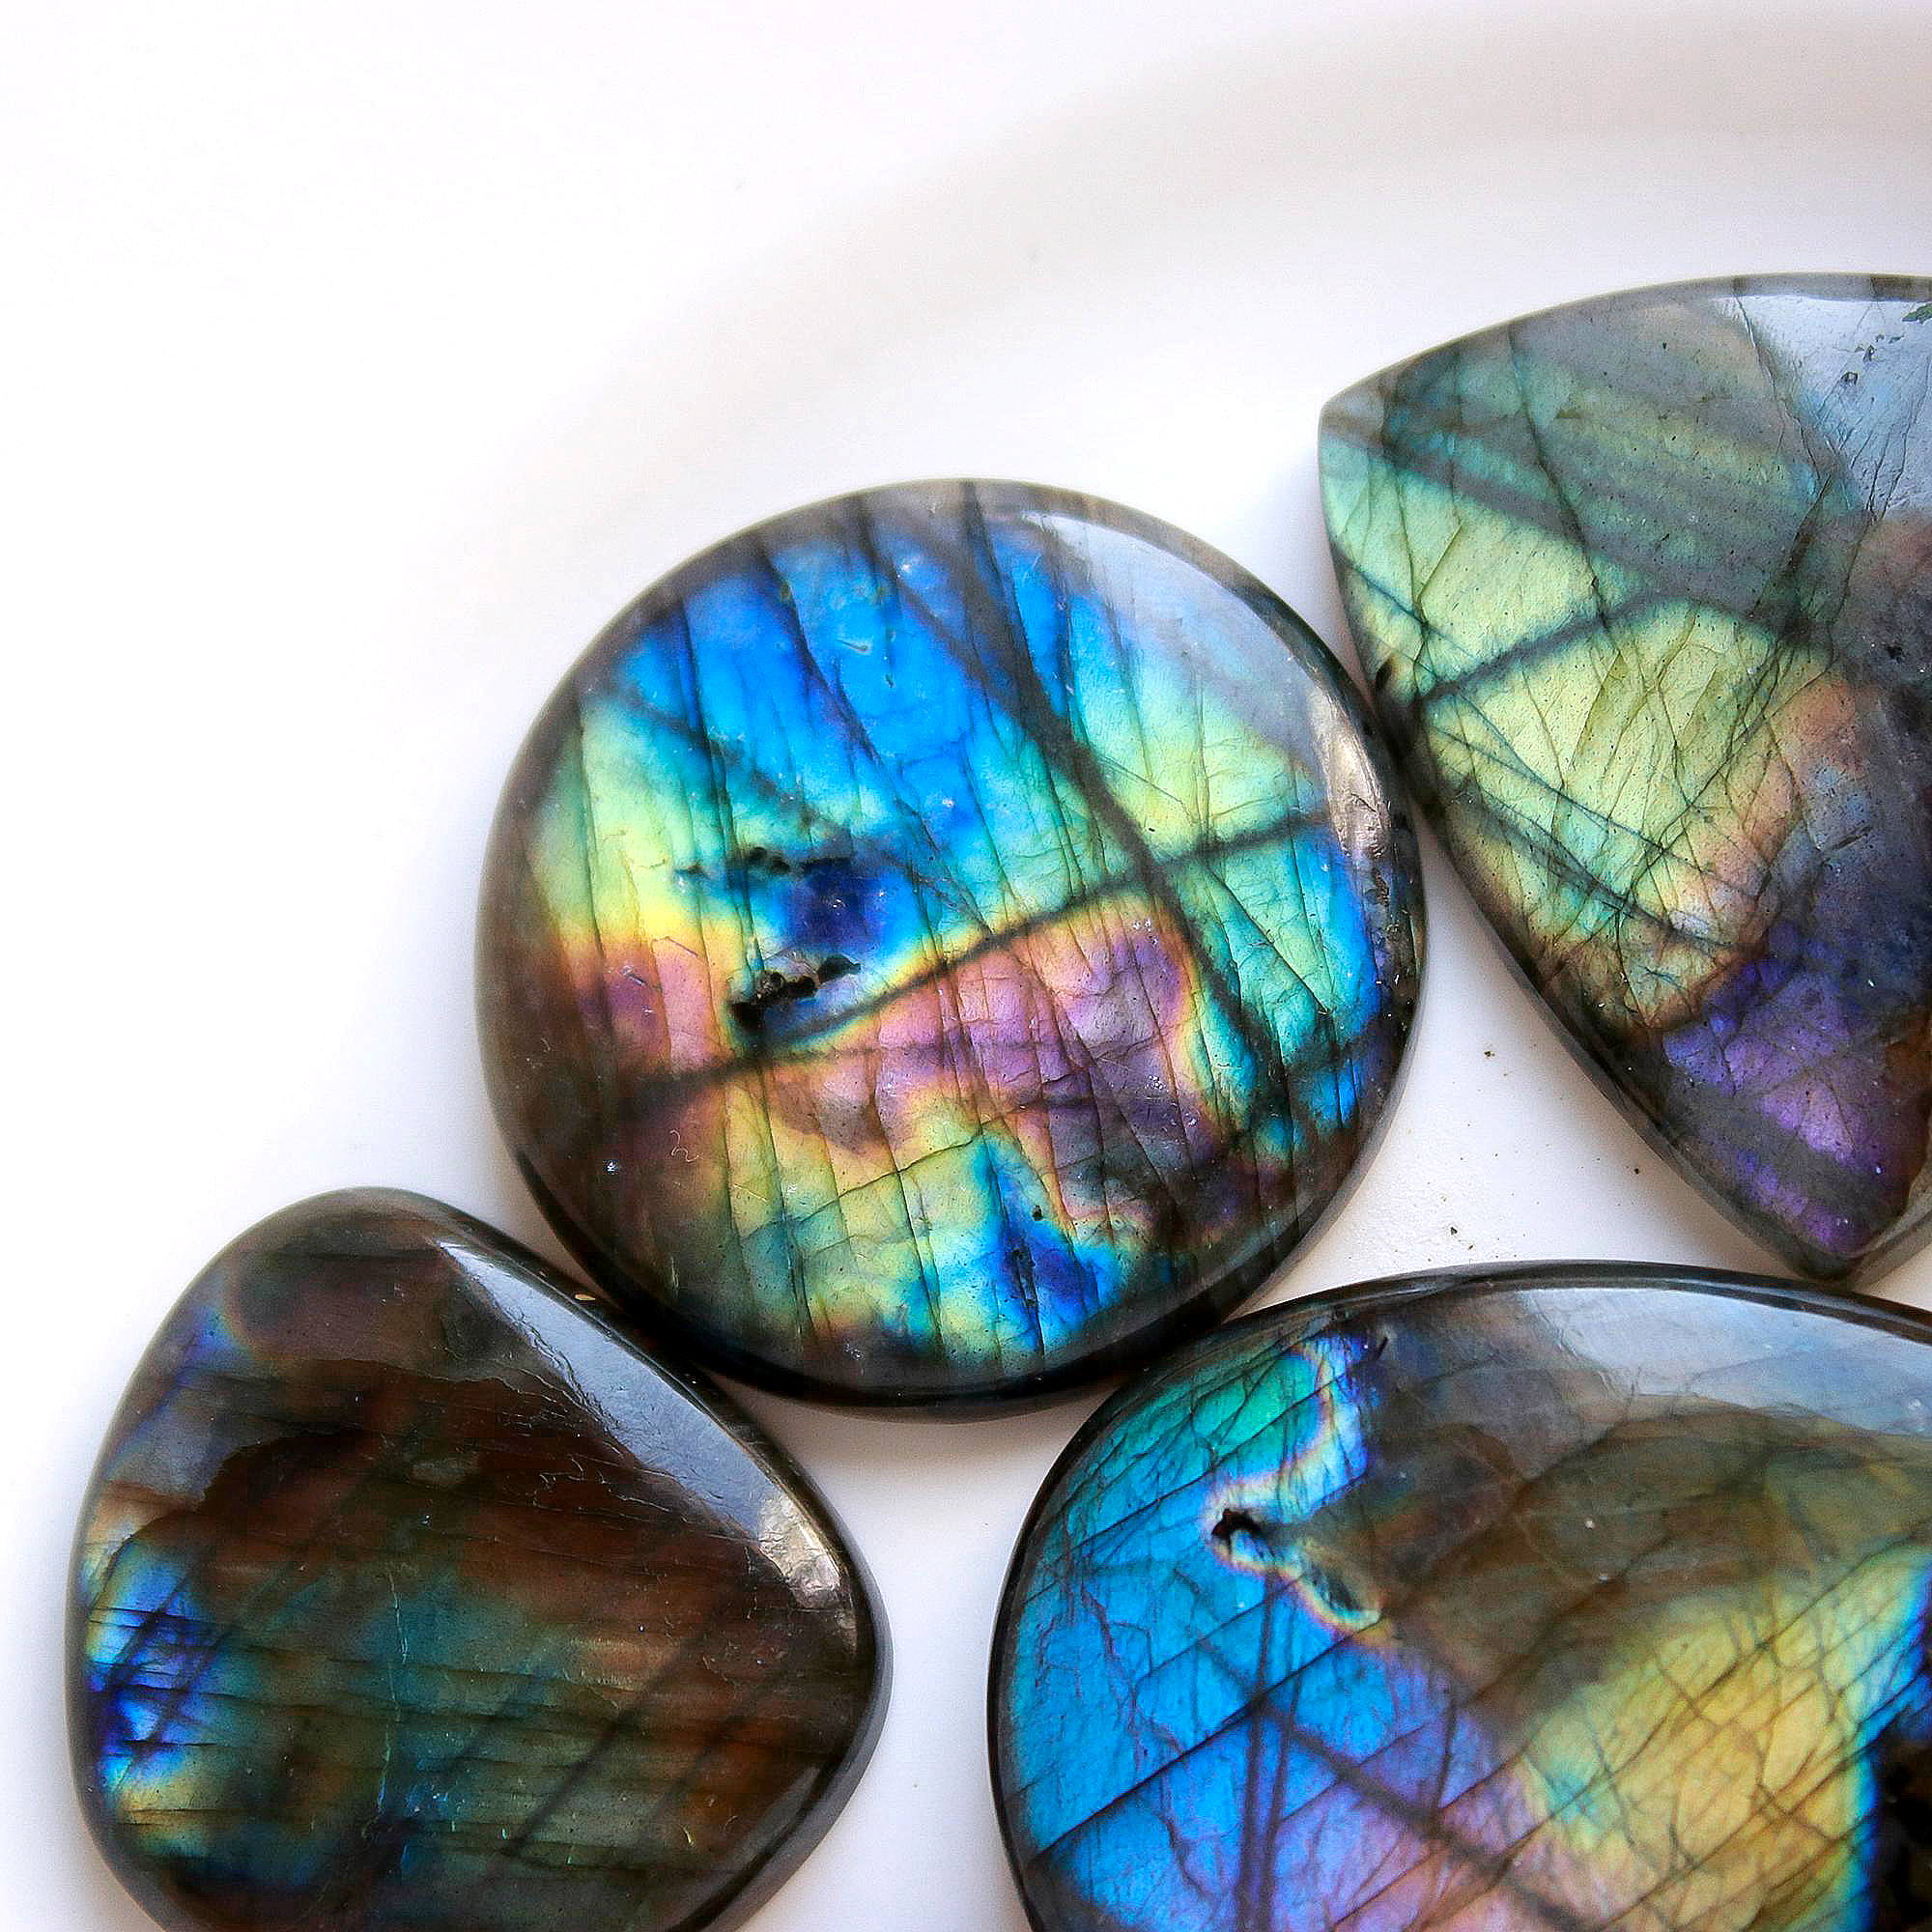 7 Pcs.442 Cts Natural labradorite Cabochon Loose Gemstone For Jewelry Wholesale Lot Size 51x31 32x30mm